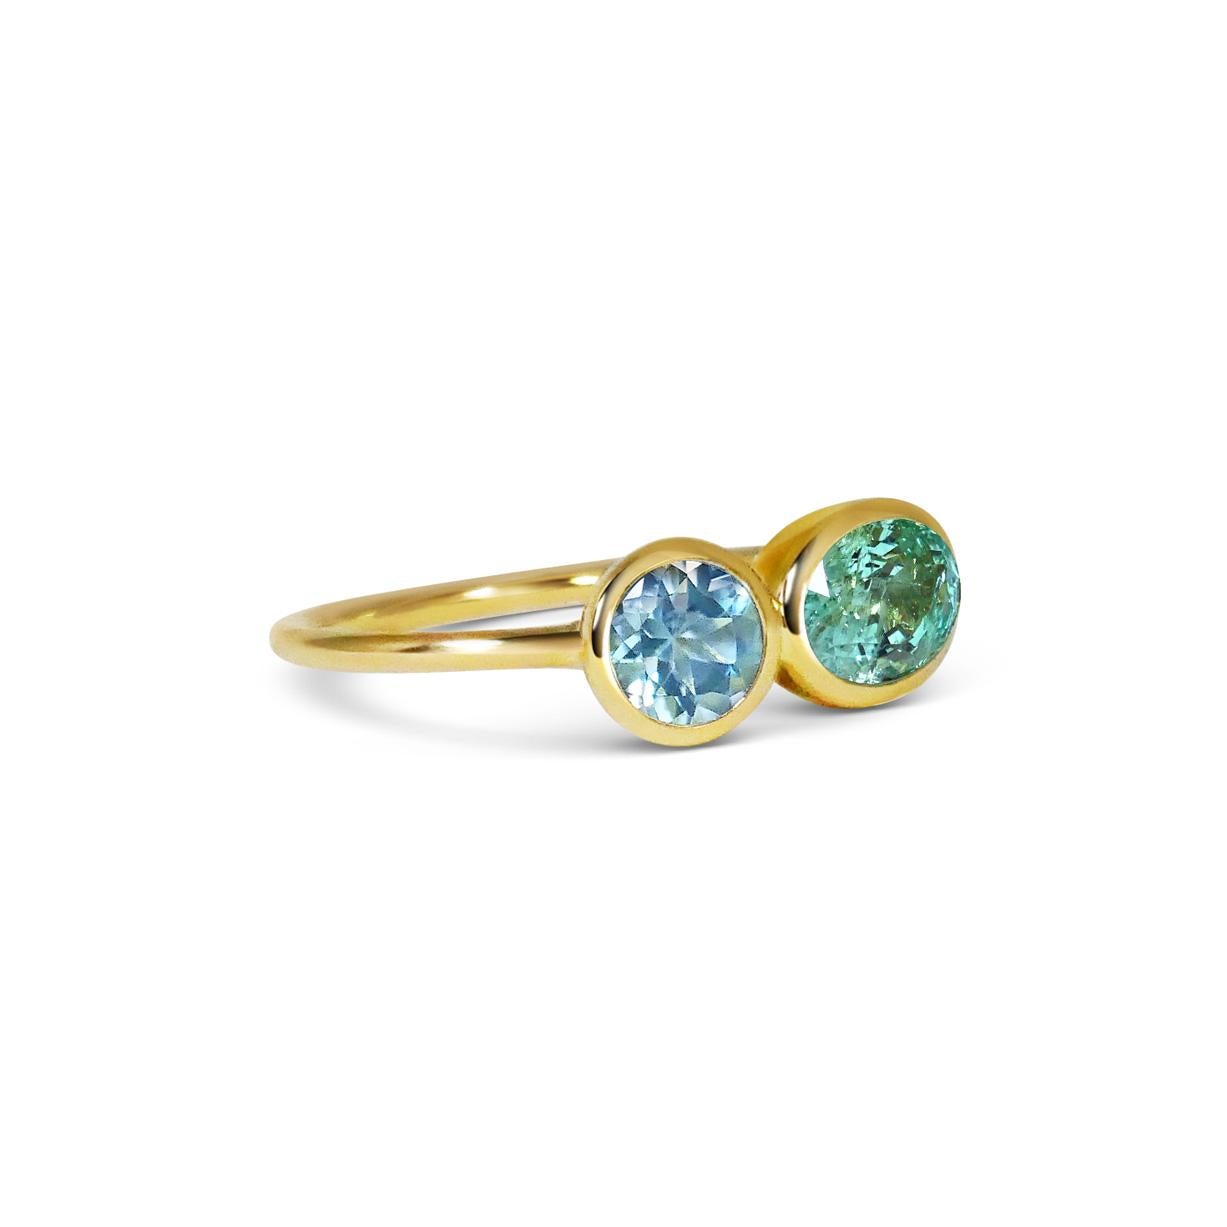 Designed as two birds singing next to one another this ring combines a colourful range of precious gems. Our signature hand pierced lace on the back of each gem allows light through the stones to reveal their natural beauty.

Certified in accordance